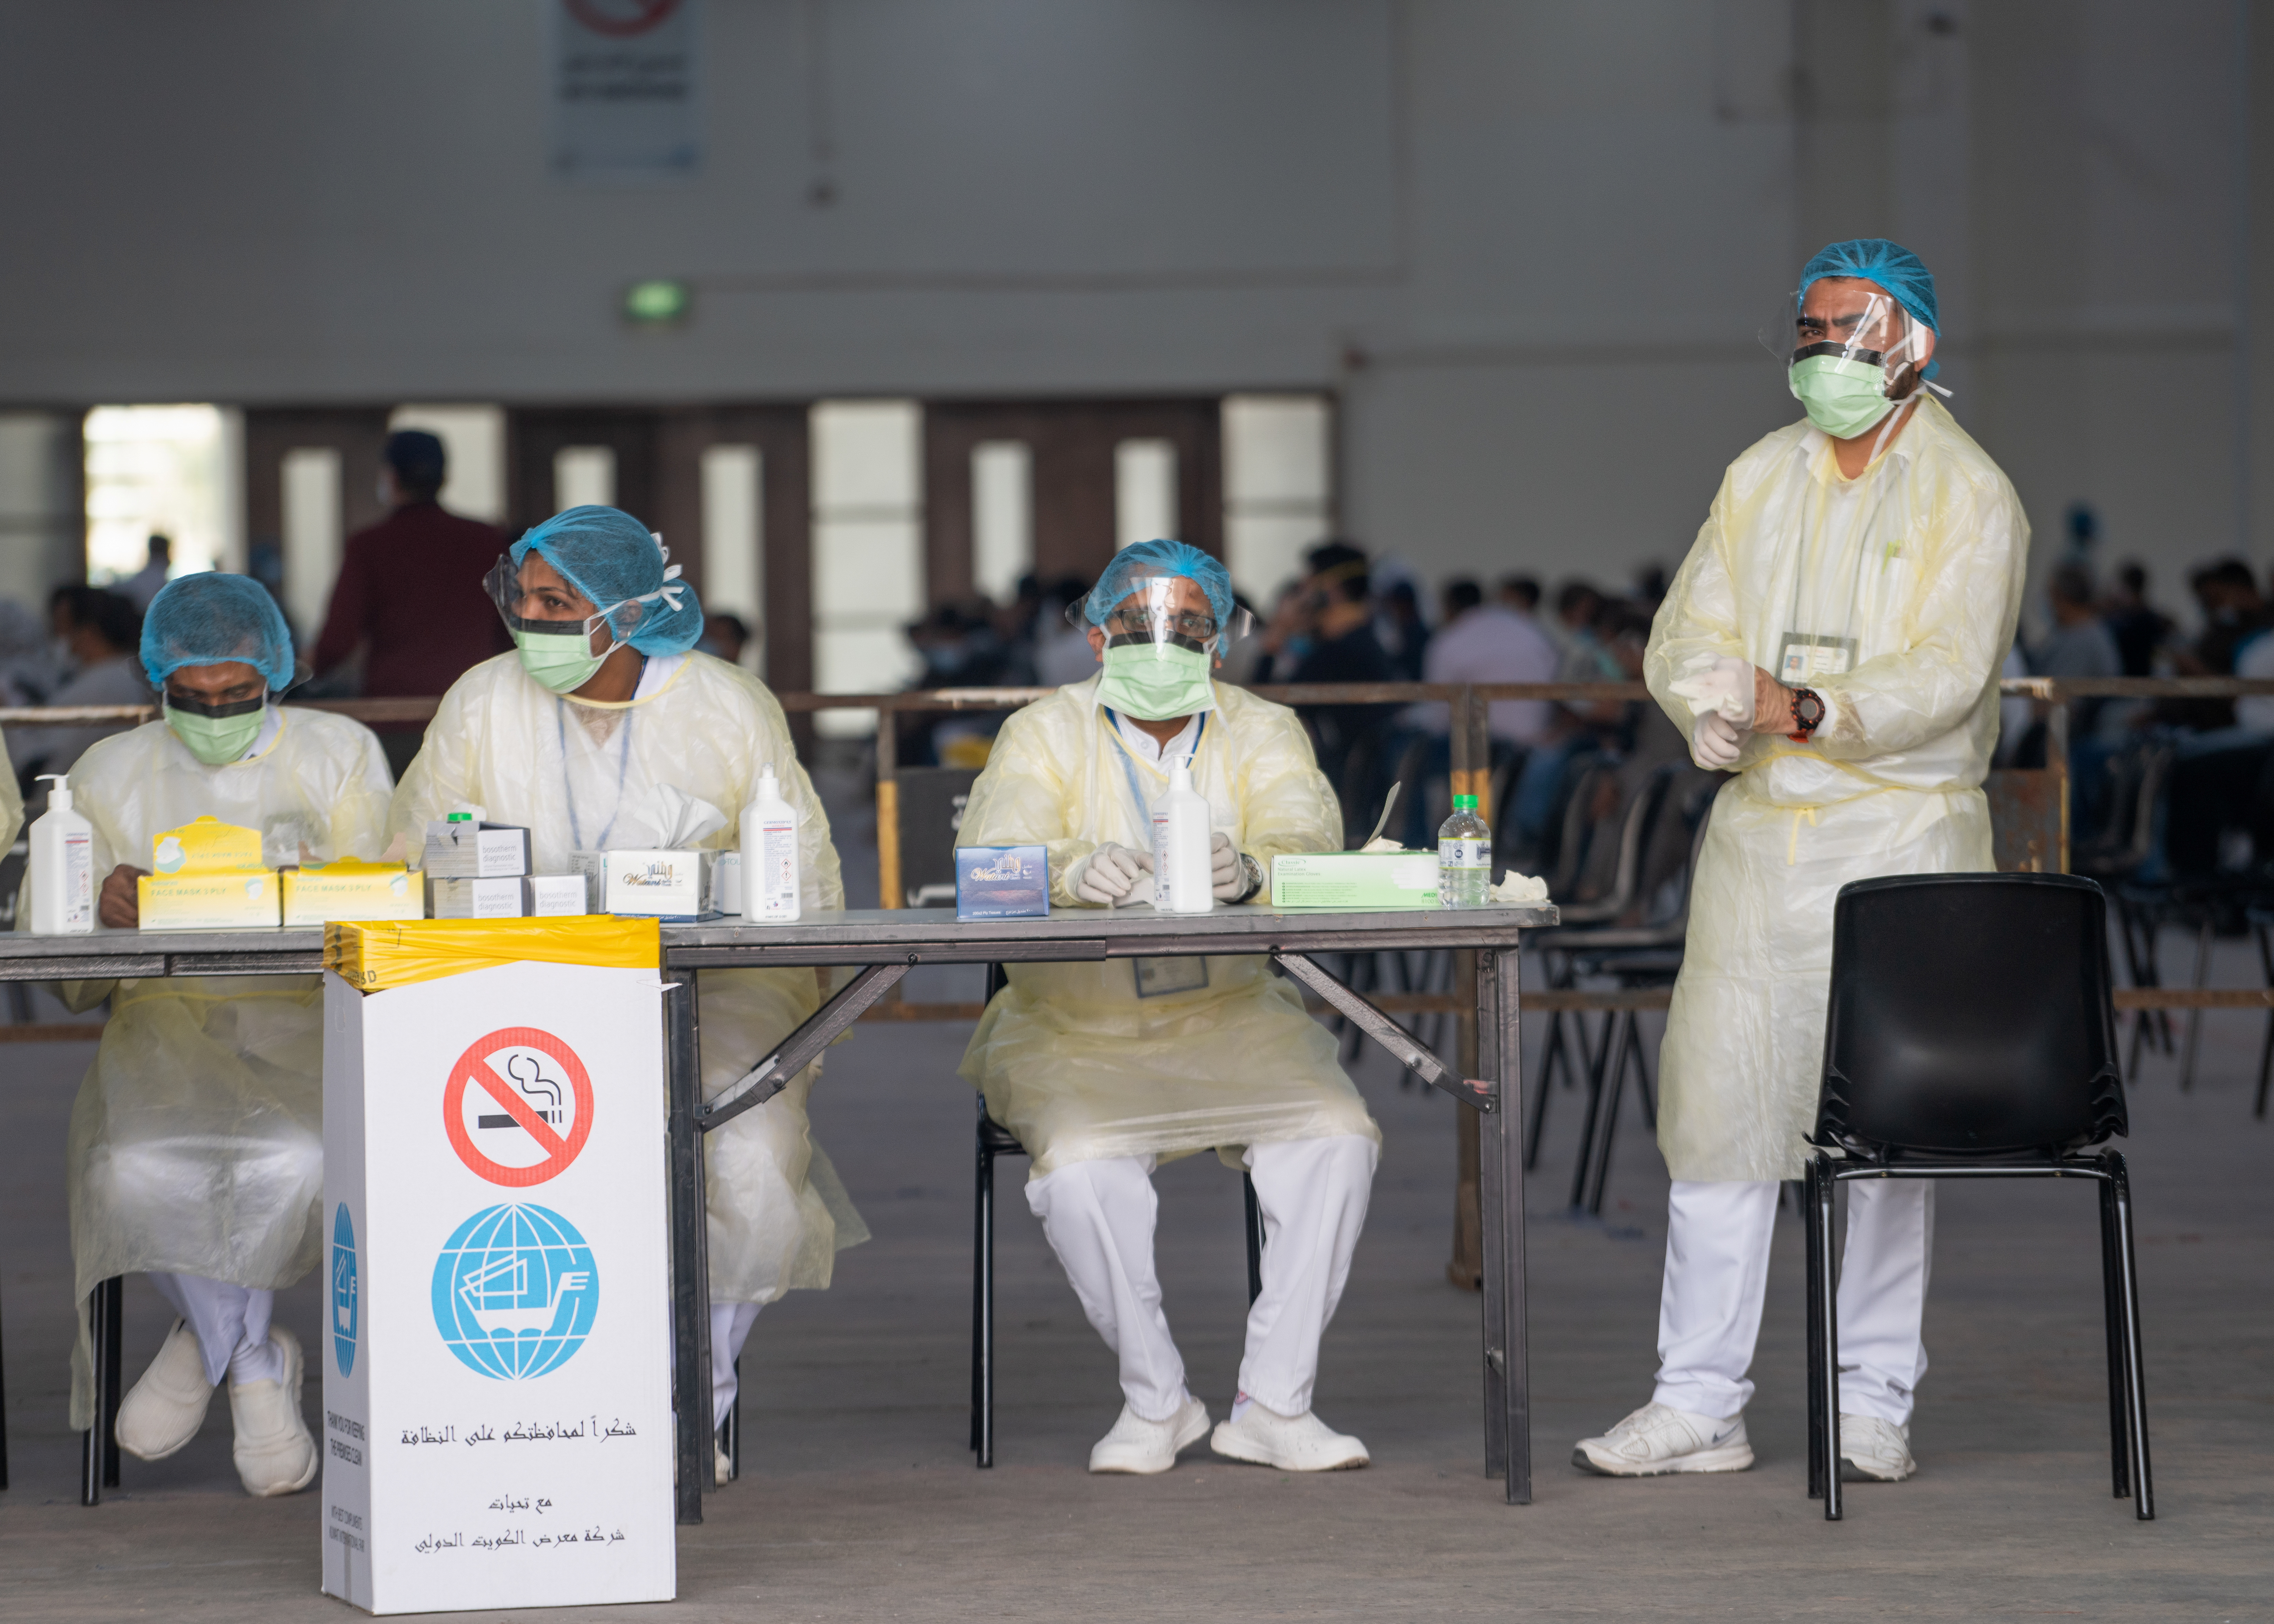 Nurses await to admit expatriates in a makeshift coronavirus testing centre at the Mishref Fair Grounds in Kuwait city, Kuwait March 12, 2020. REUTERS/Stephanie McGehee